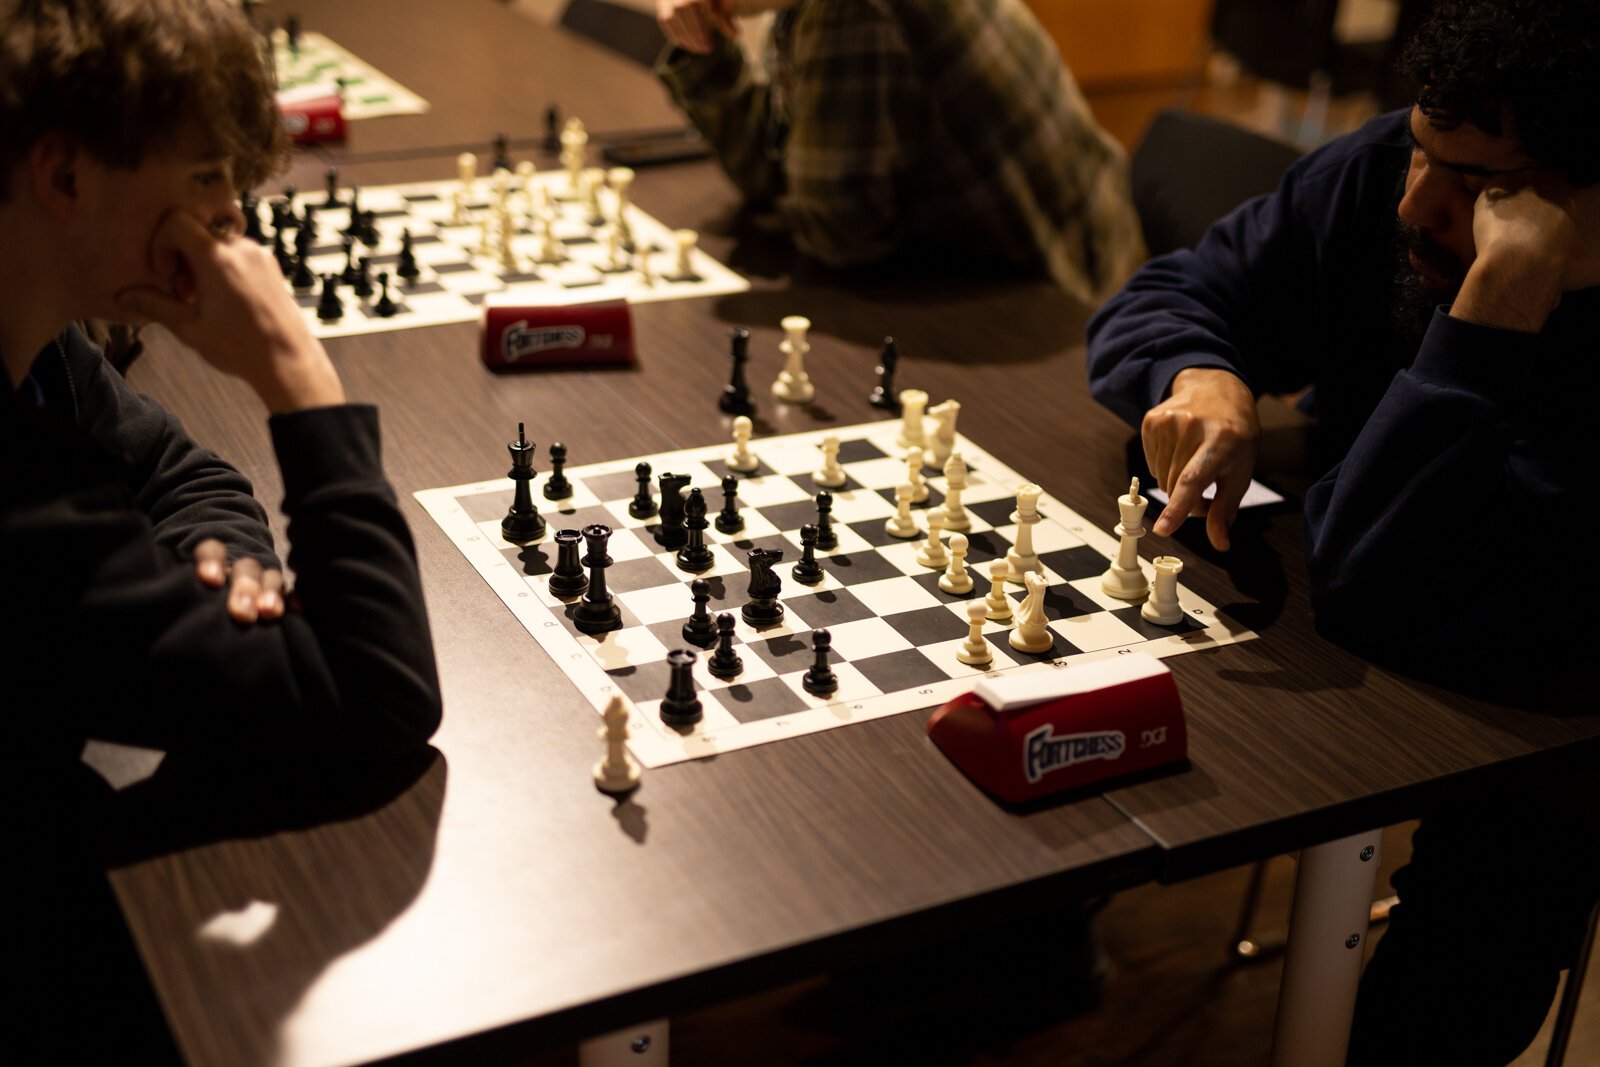 Fort Wayne has a thriving chess subculture.